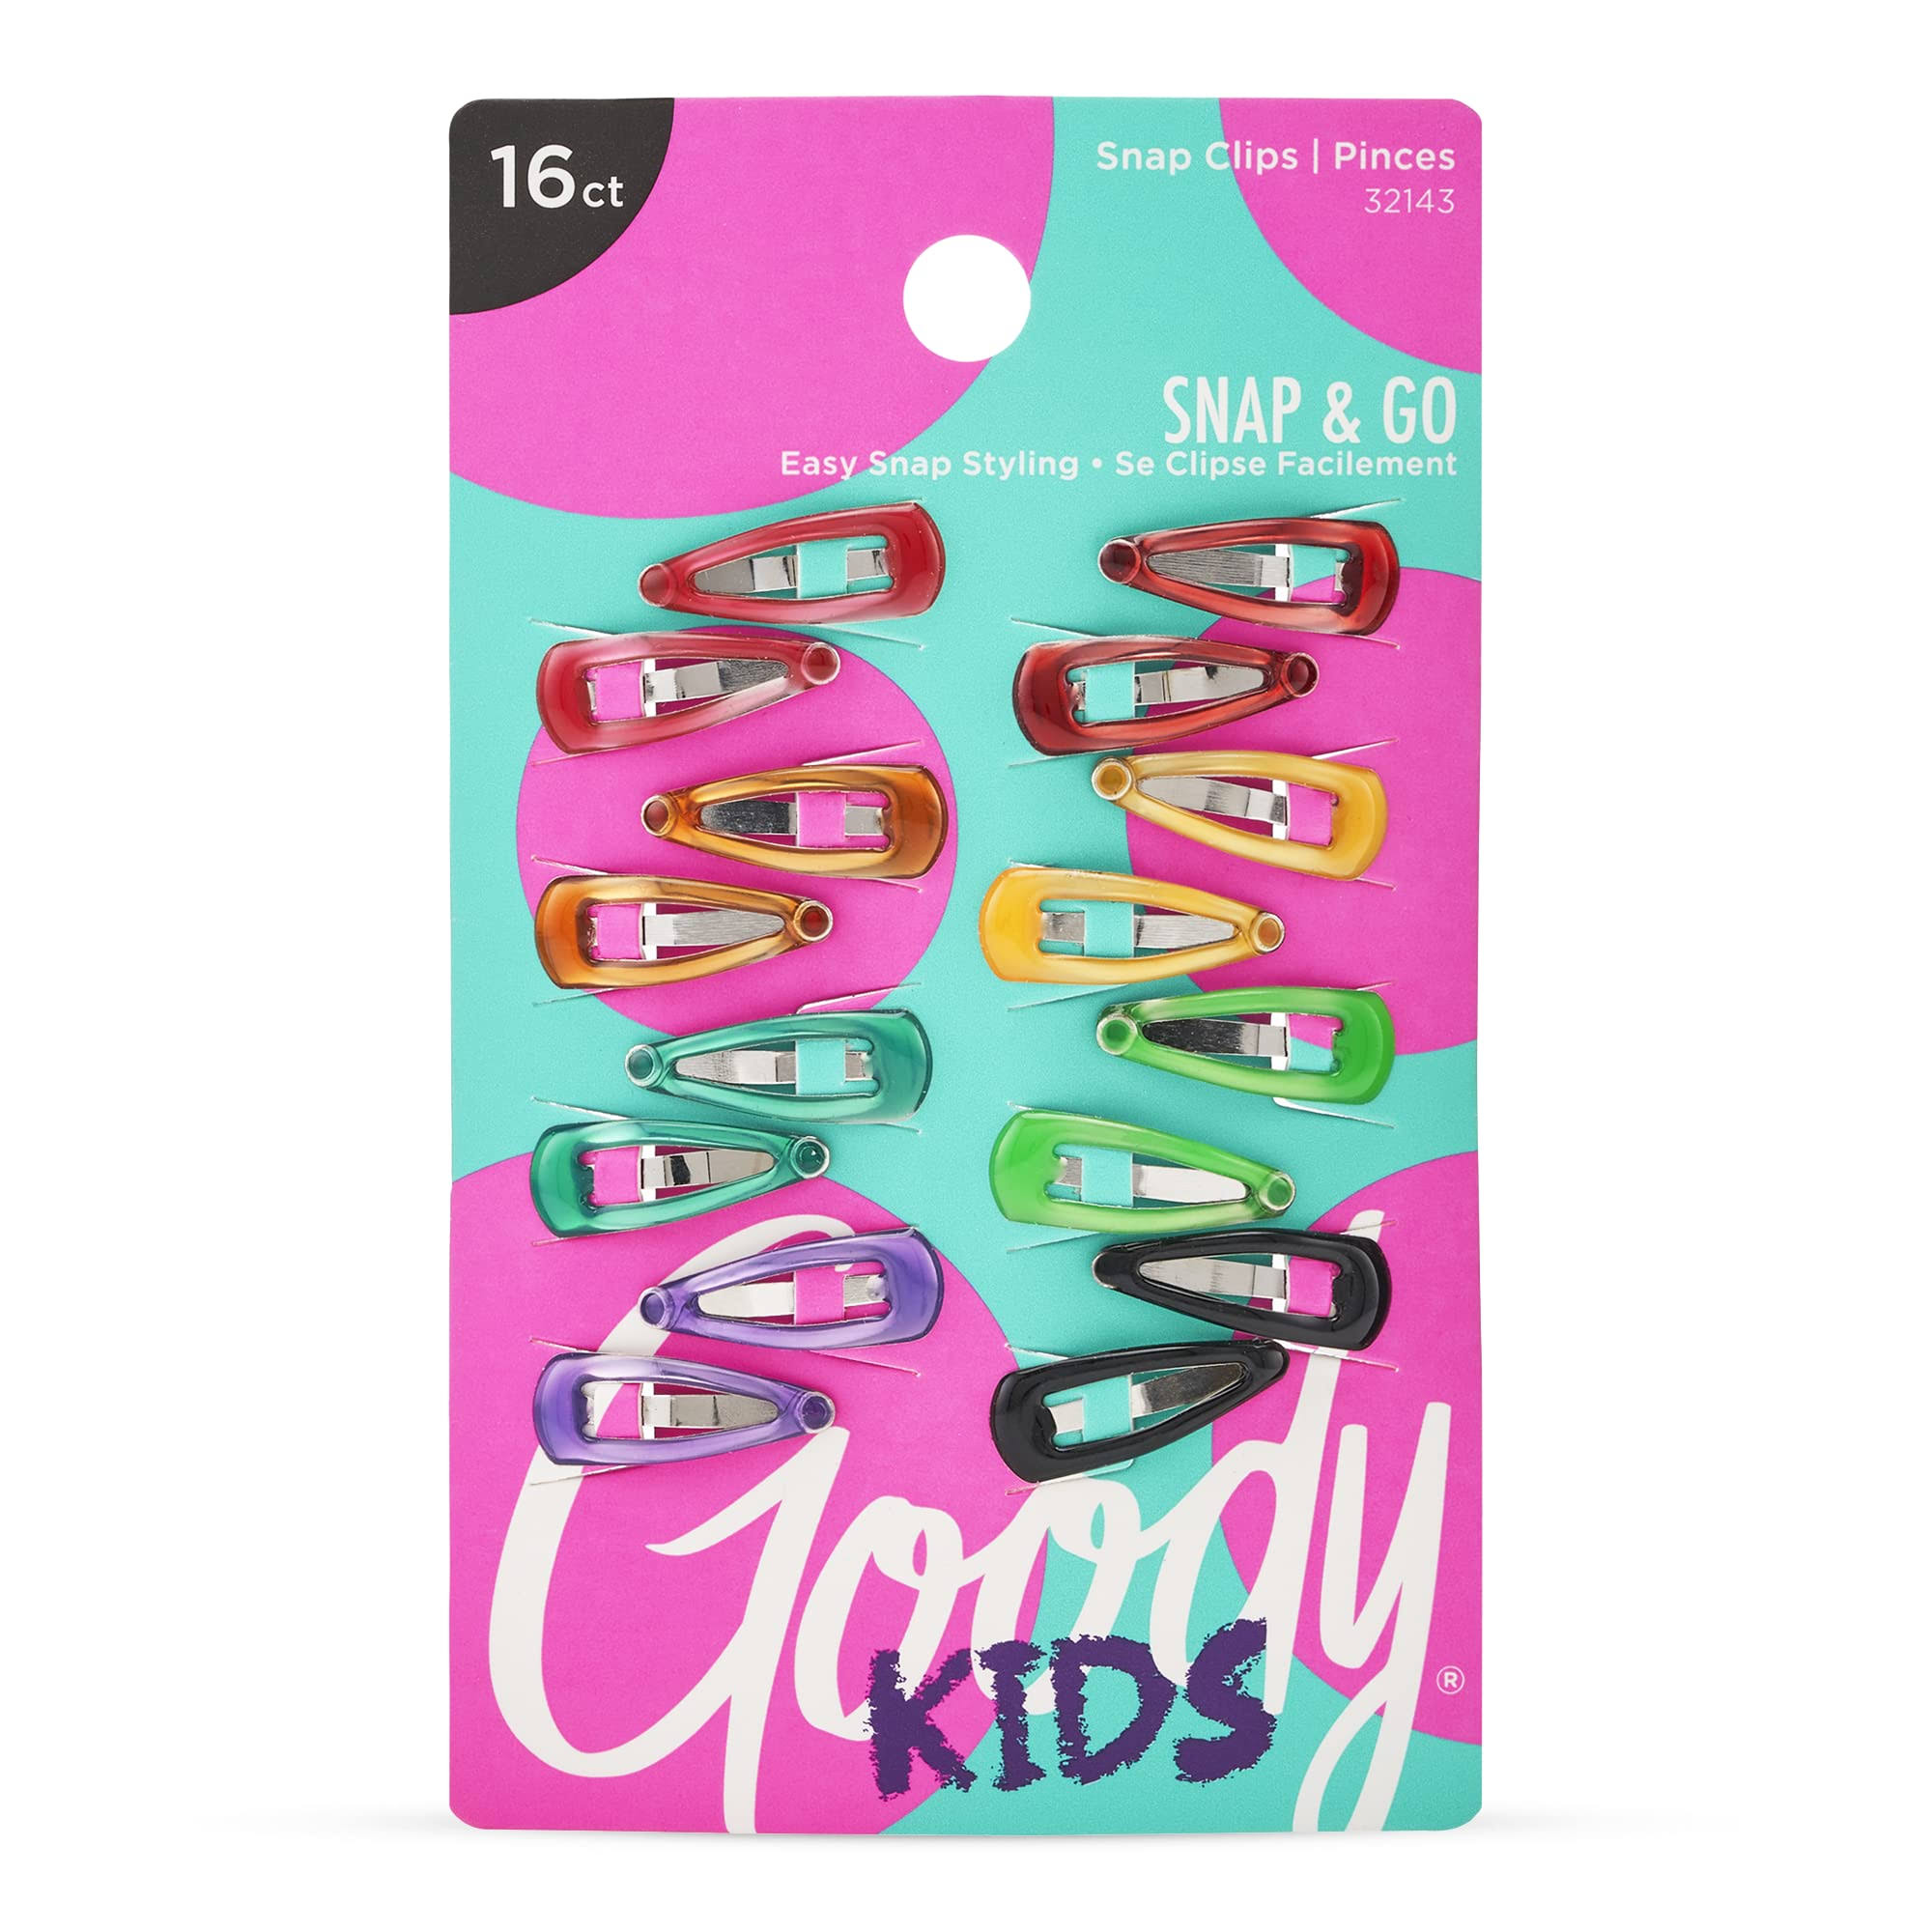 Goody Glam Girls Snap Clips - 16ct